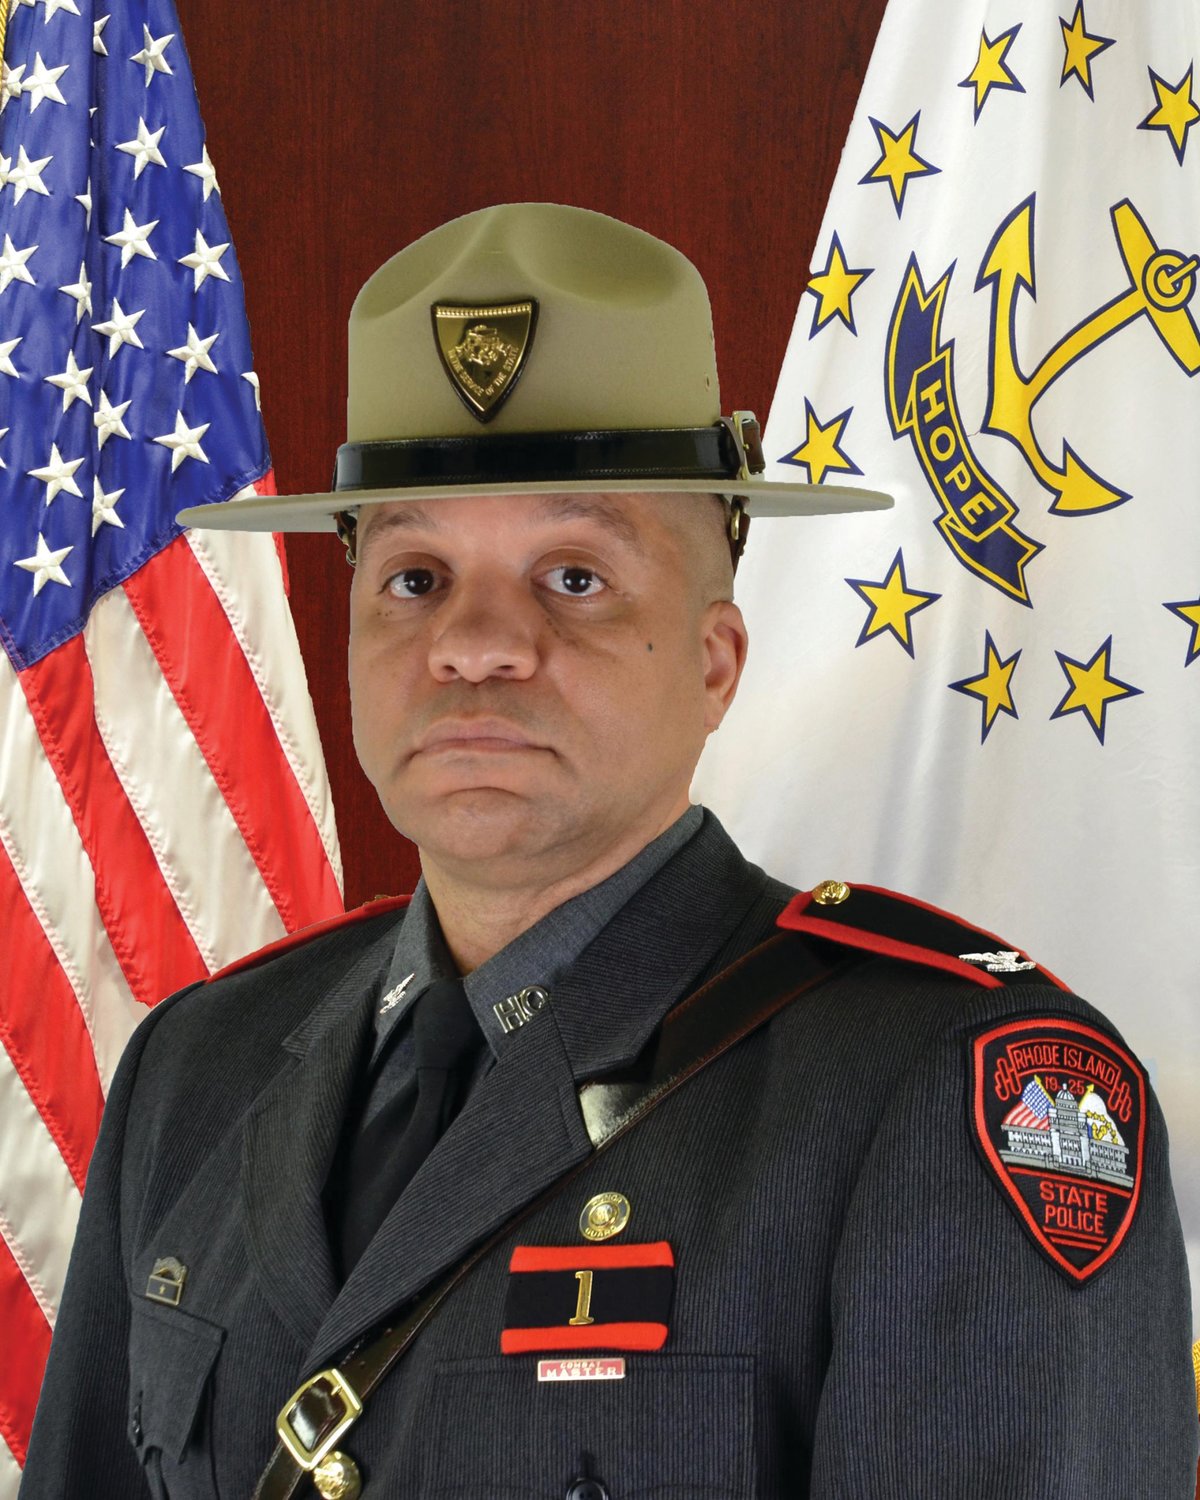 Colonel Darnell S. Weaver serves as Superintendent of the Rhode Island State Police and Director of the Rhode Island Department of Public Safety.